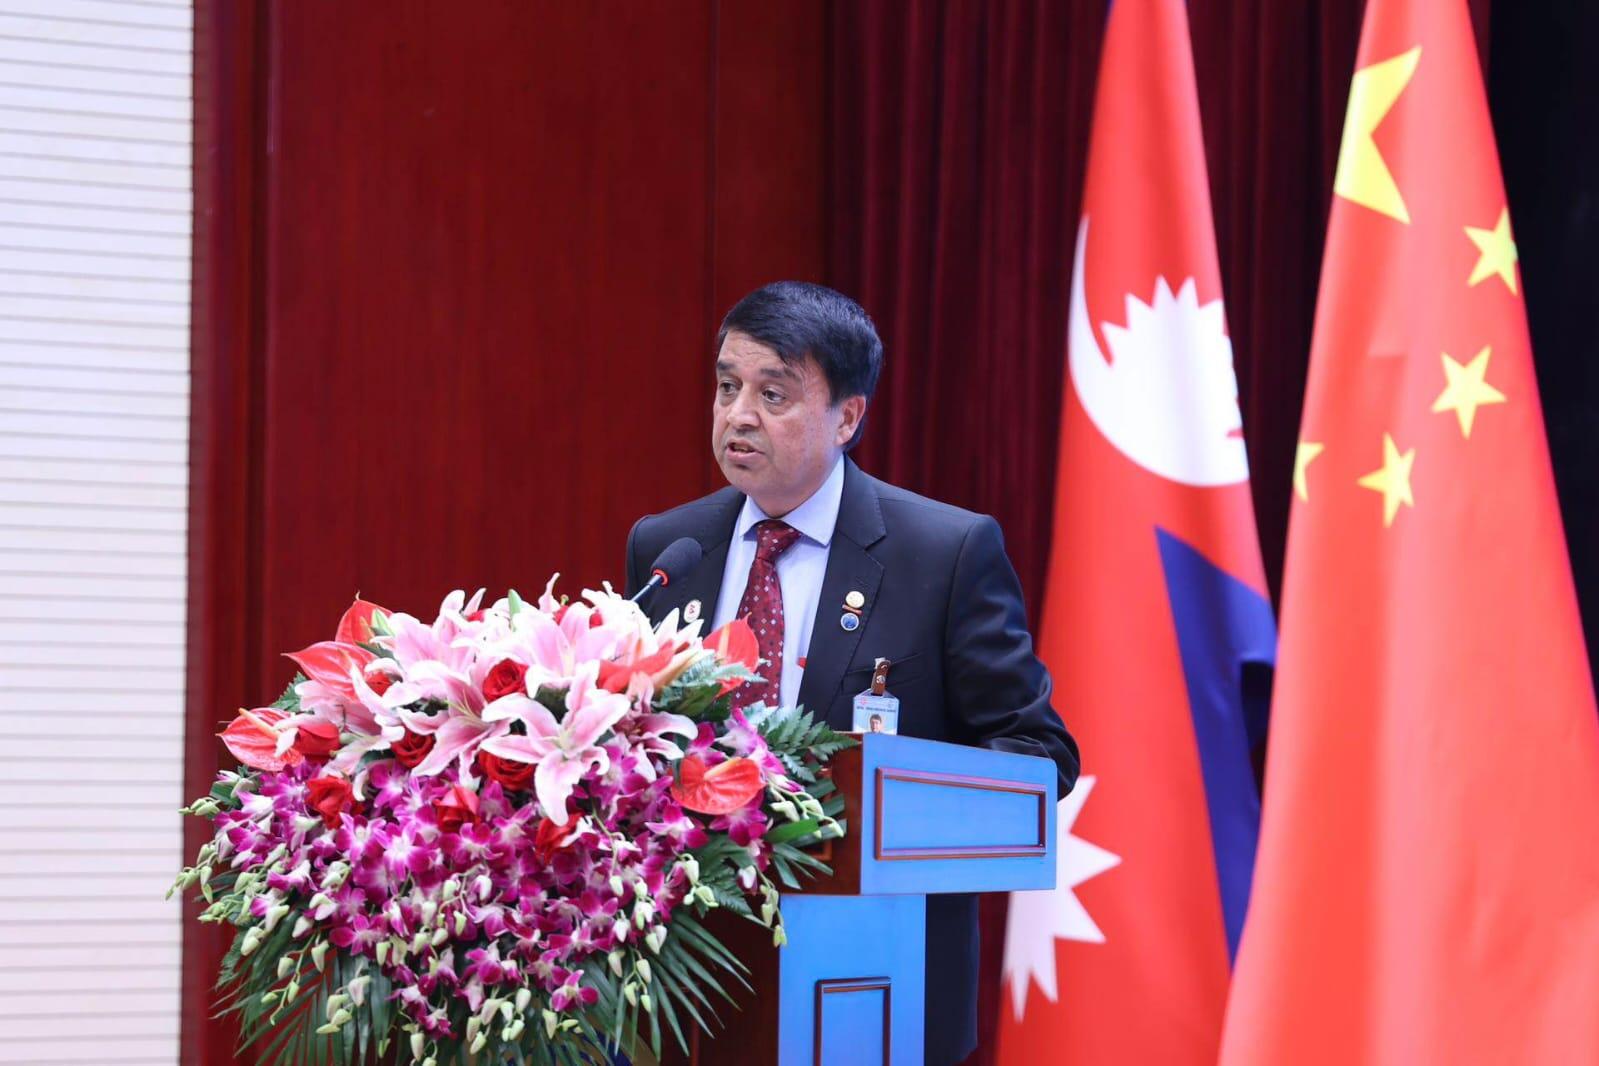 Address at Nepal-China Business Summit in Beijing on Sep 24